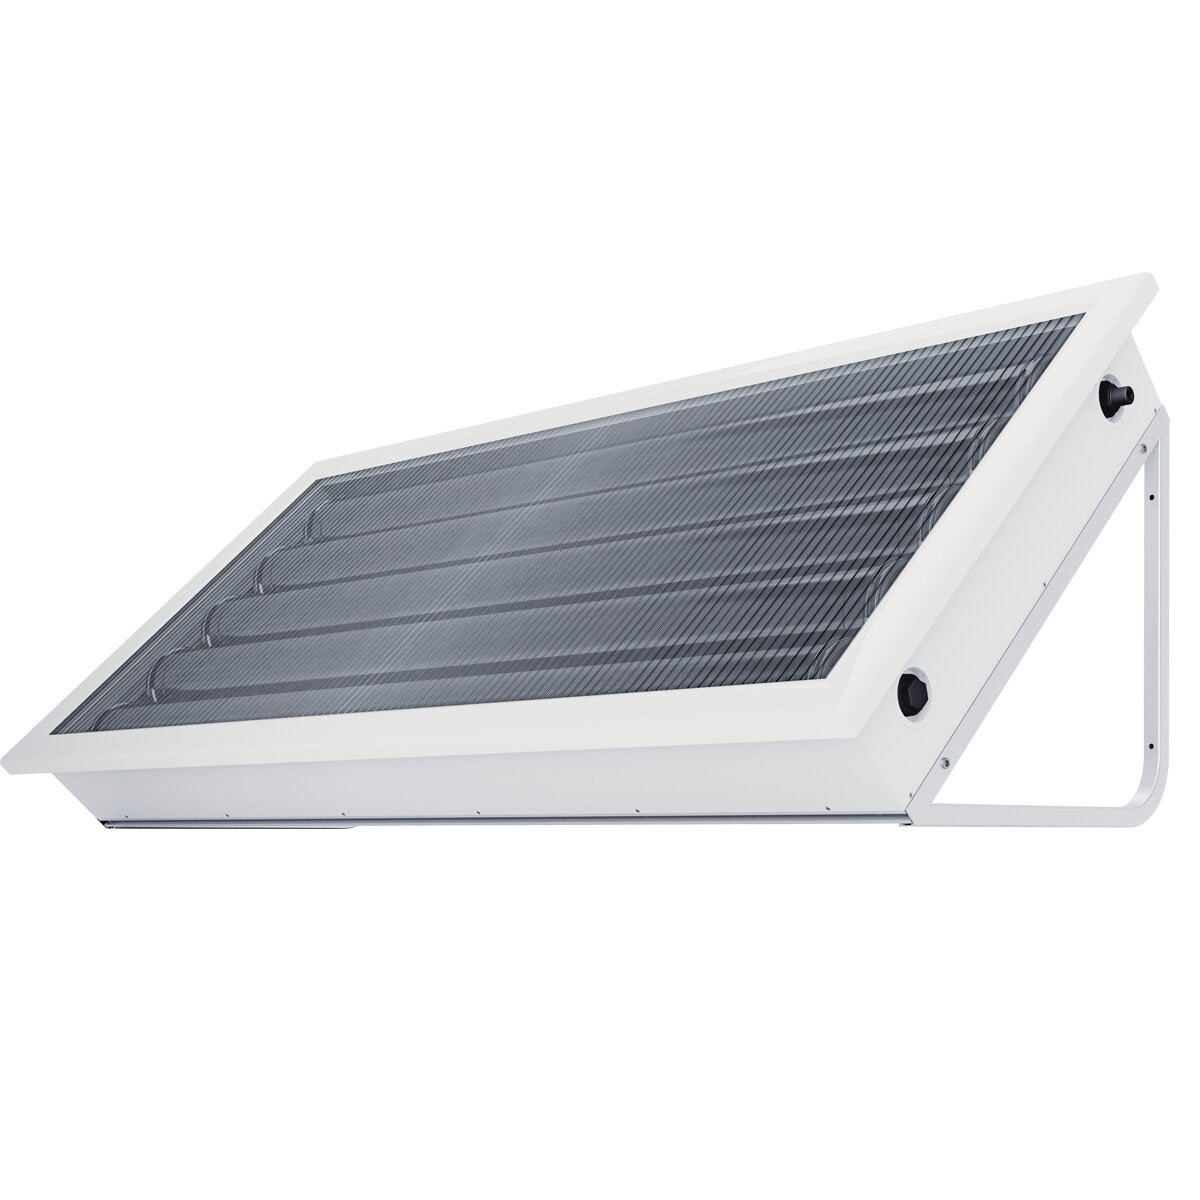 Natural circulation solar panel Pleion Ego 260 white 245 liters with installation accessories